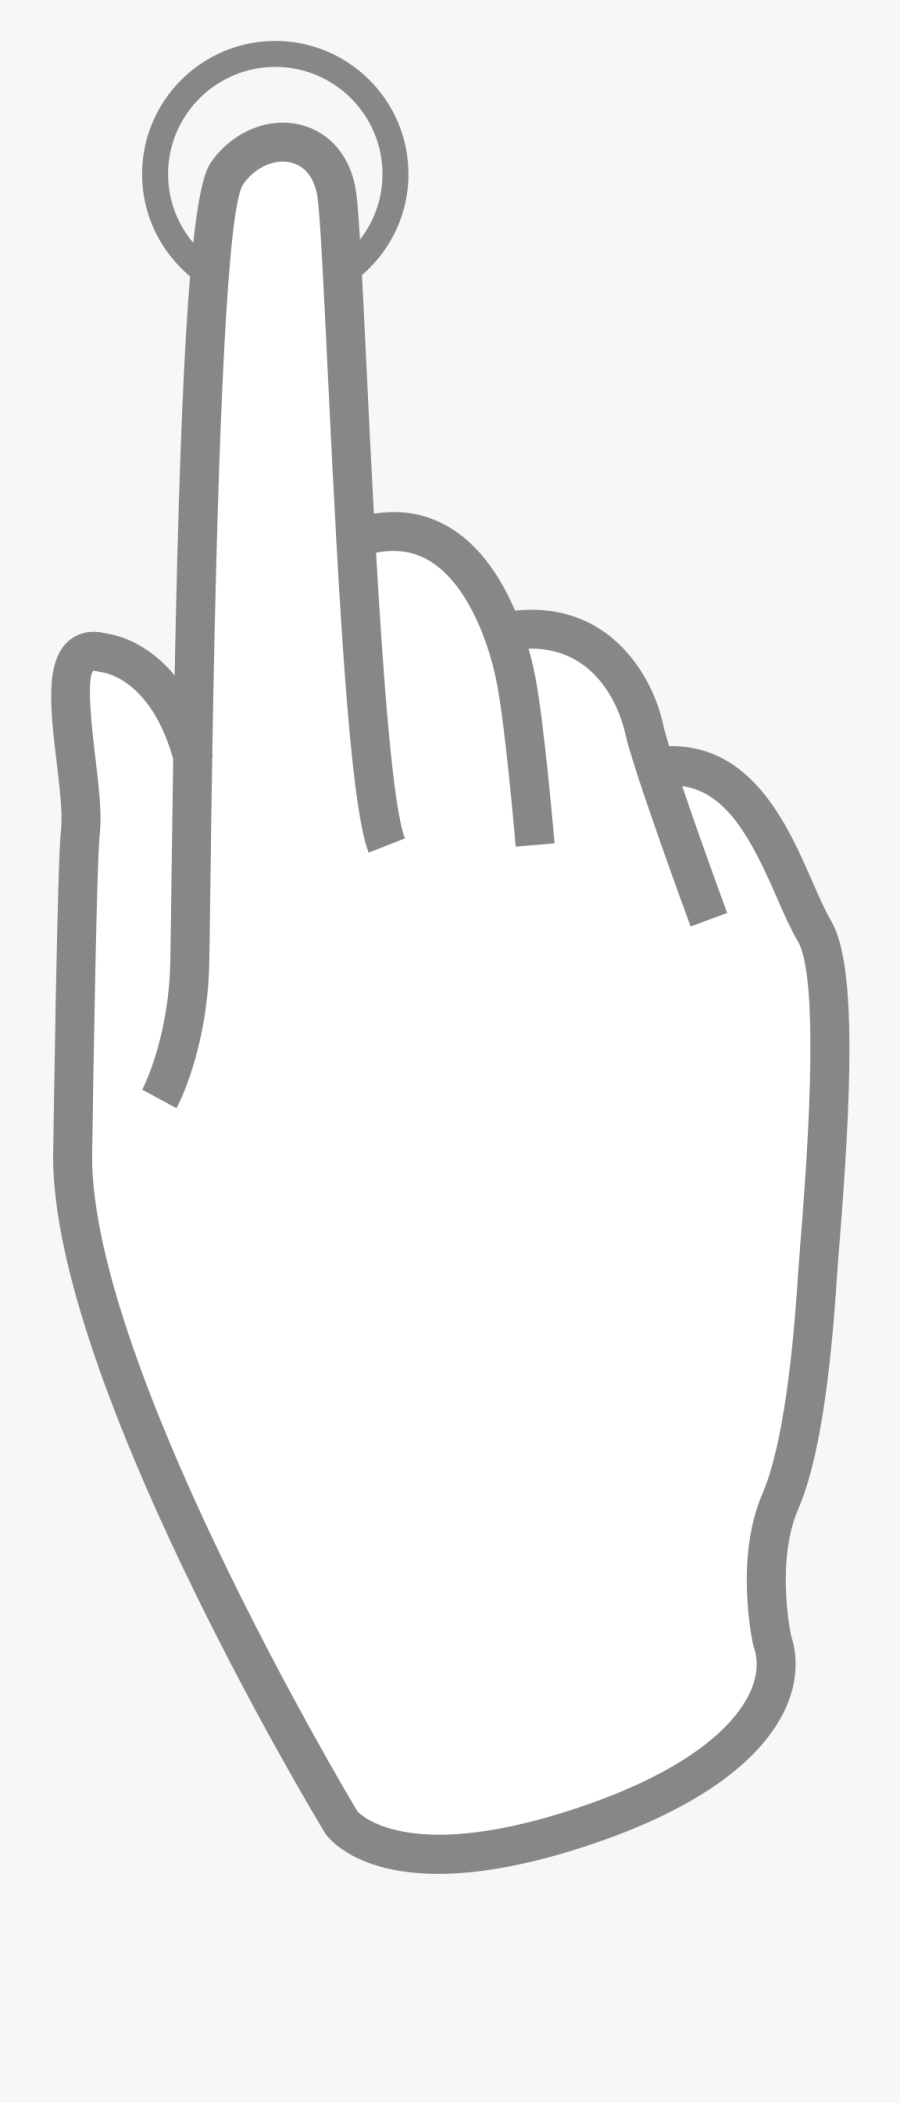 Multitouch Big Image Png - Tap Finger Gif Png, Transparent Clipart